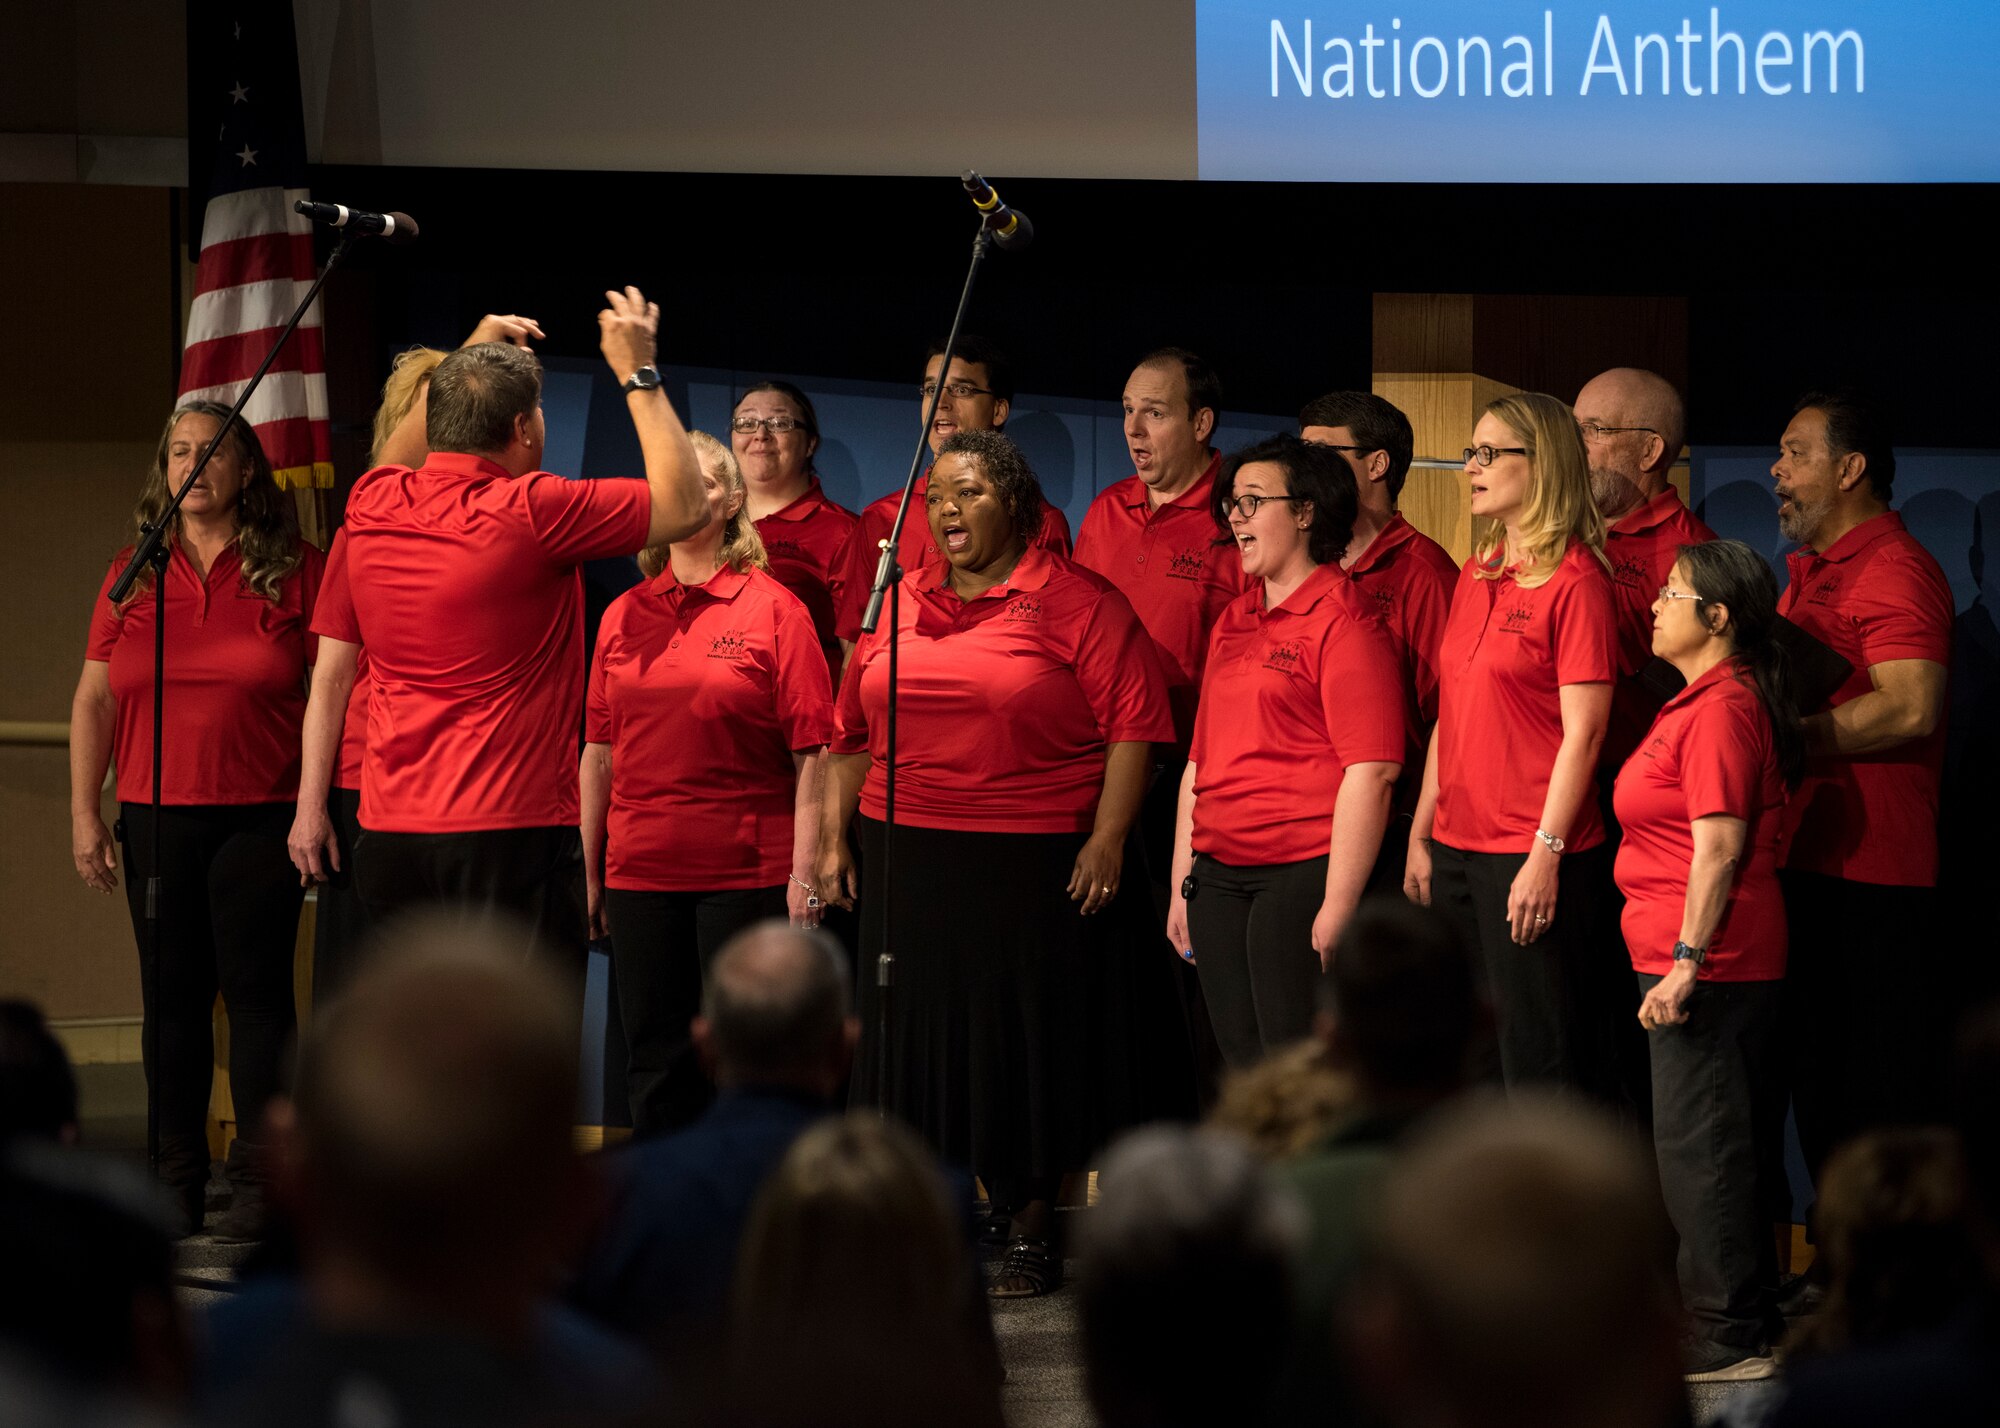 The Sandia Singers perform the National Anthem at the 67th Annual National Day of Prayer observance at Kirtland Air Force Base, N.M., May 3. The National Day of Prayer observance was created in 1952 by a joint resolution of the United States Congress, and signed into law by President Harry S. Truman.(U.S. Air Force photo by Staff Sgt. J.D. Strong II)